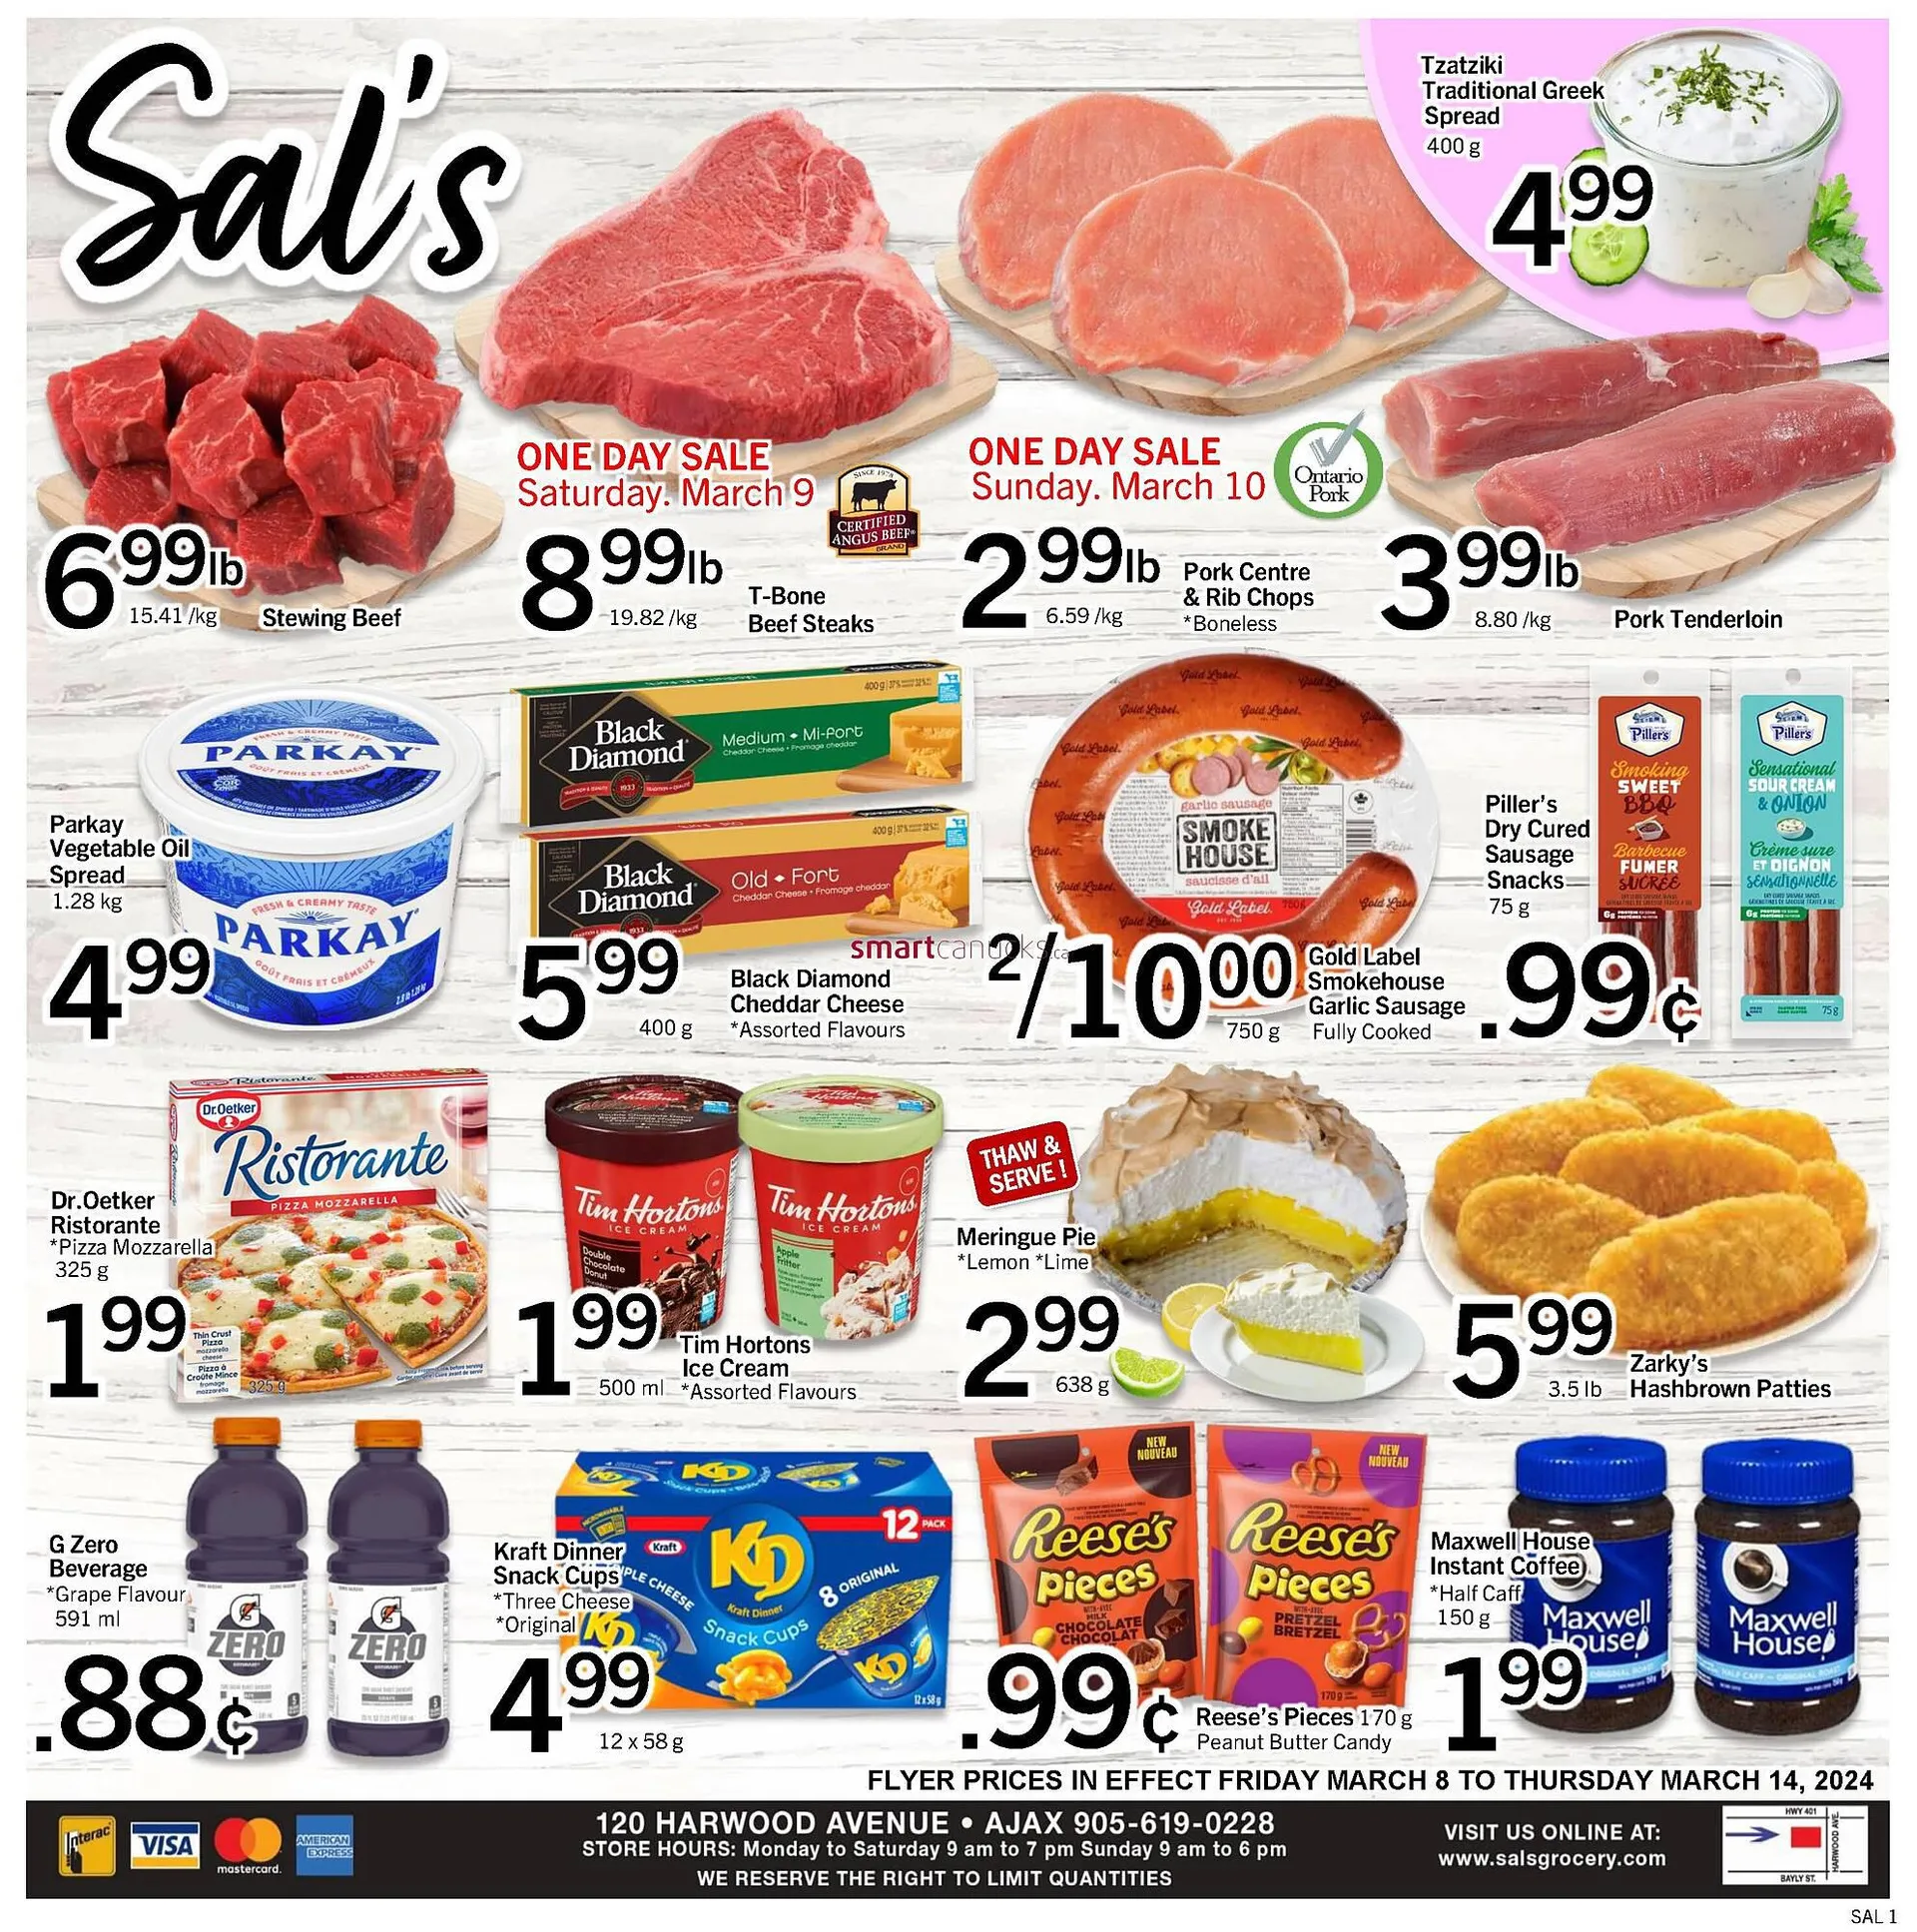 Sal's Grocery flyer from March 8 to March 14 2024 - flyer page 